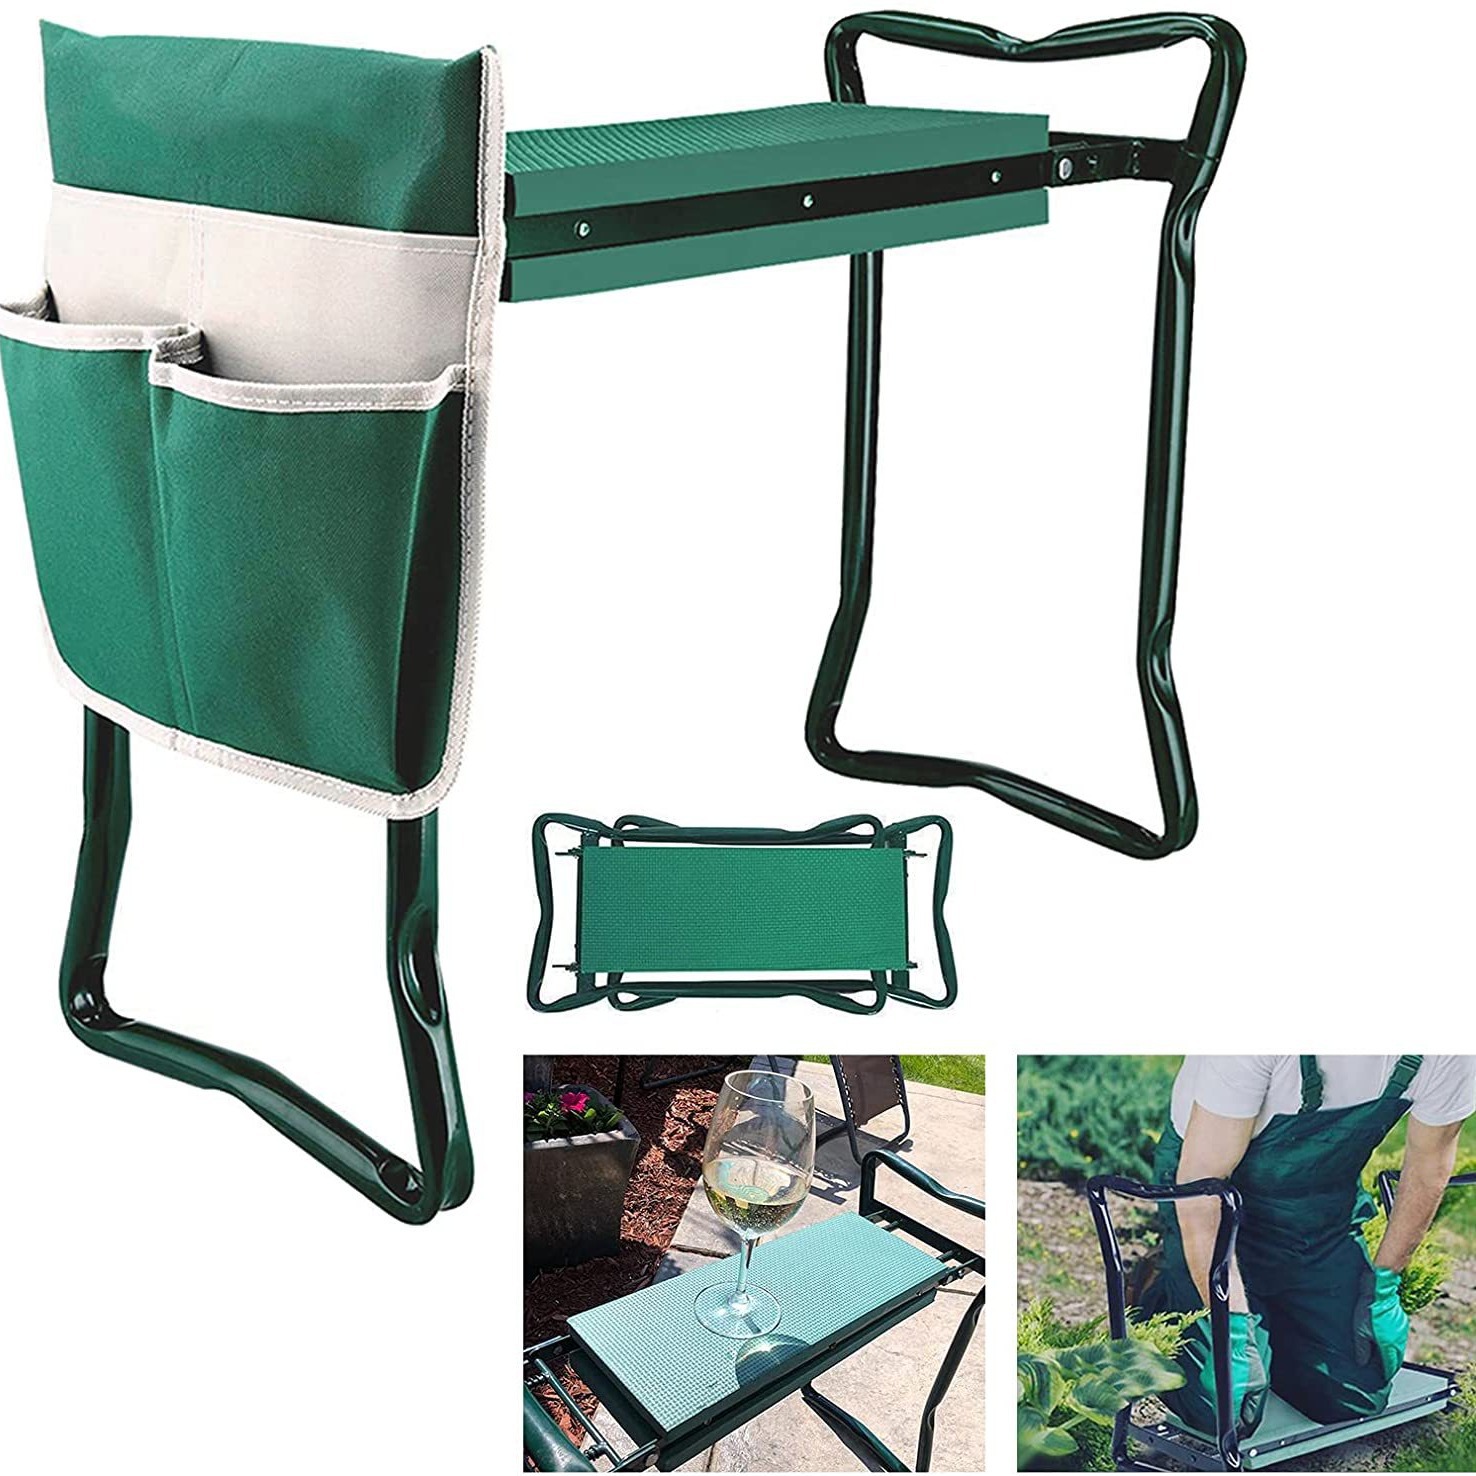 Foldable Garden Stools Garden Kneeler And Seat with Tool Bag Pouch EVA Foam Pad